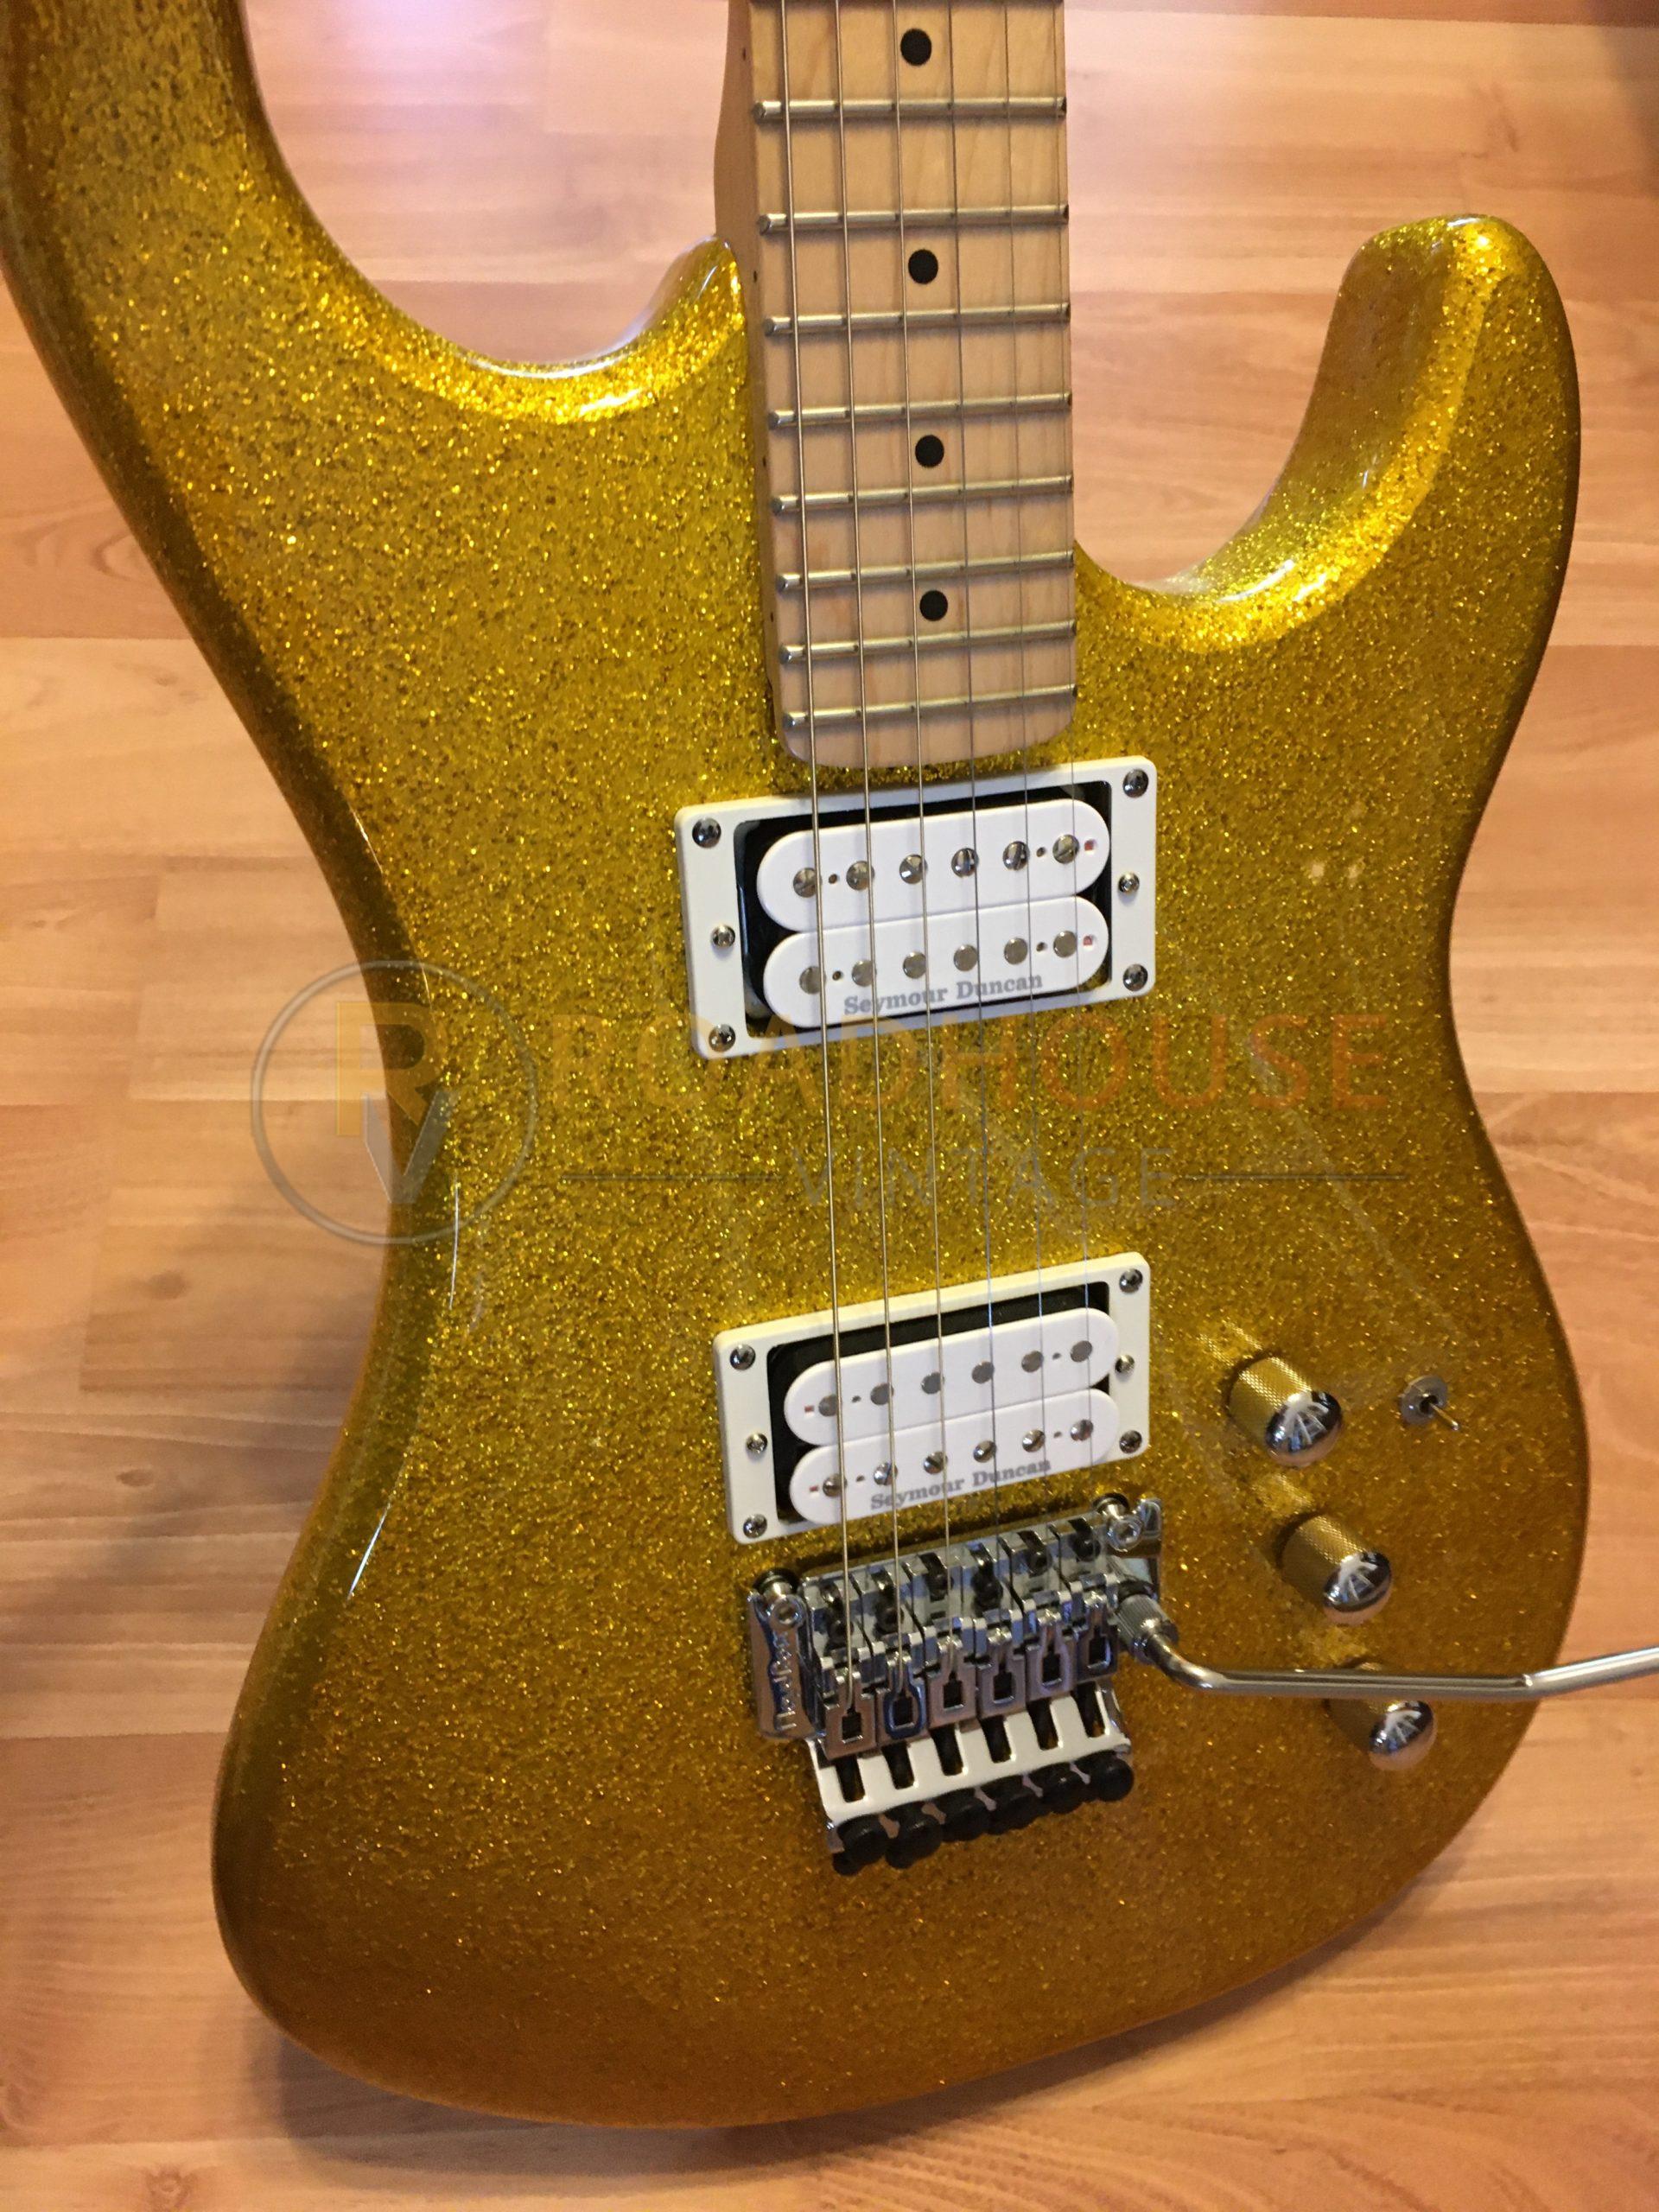 Kramer limited edition Pacer Gold｜エレキギター www.smecleveland.com